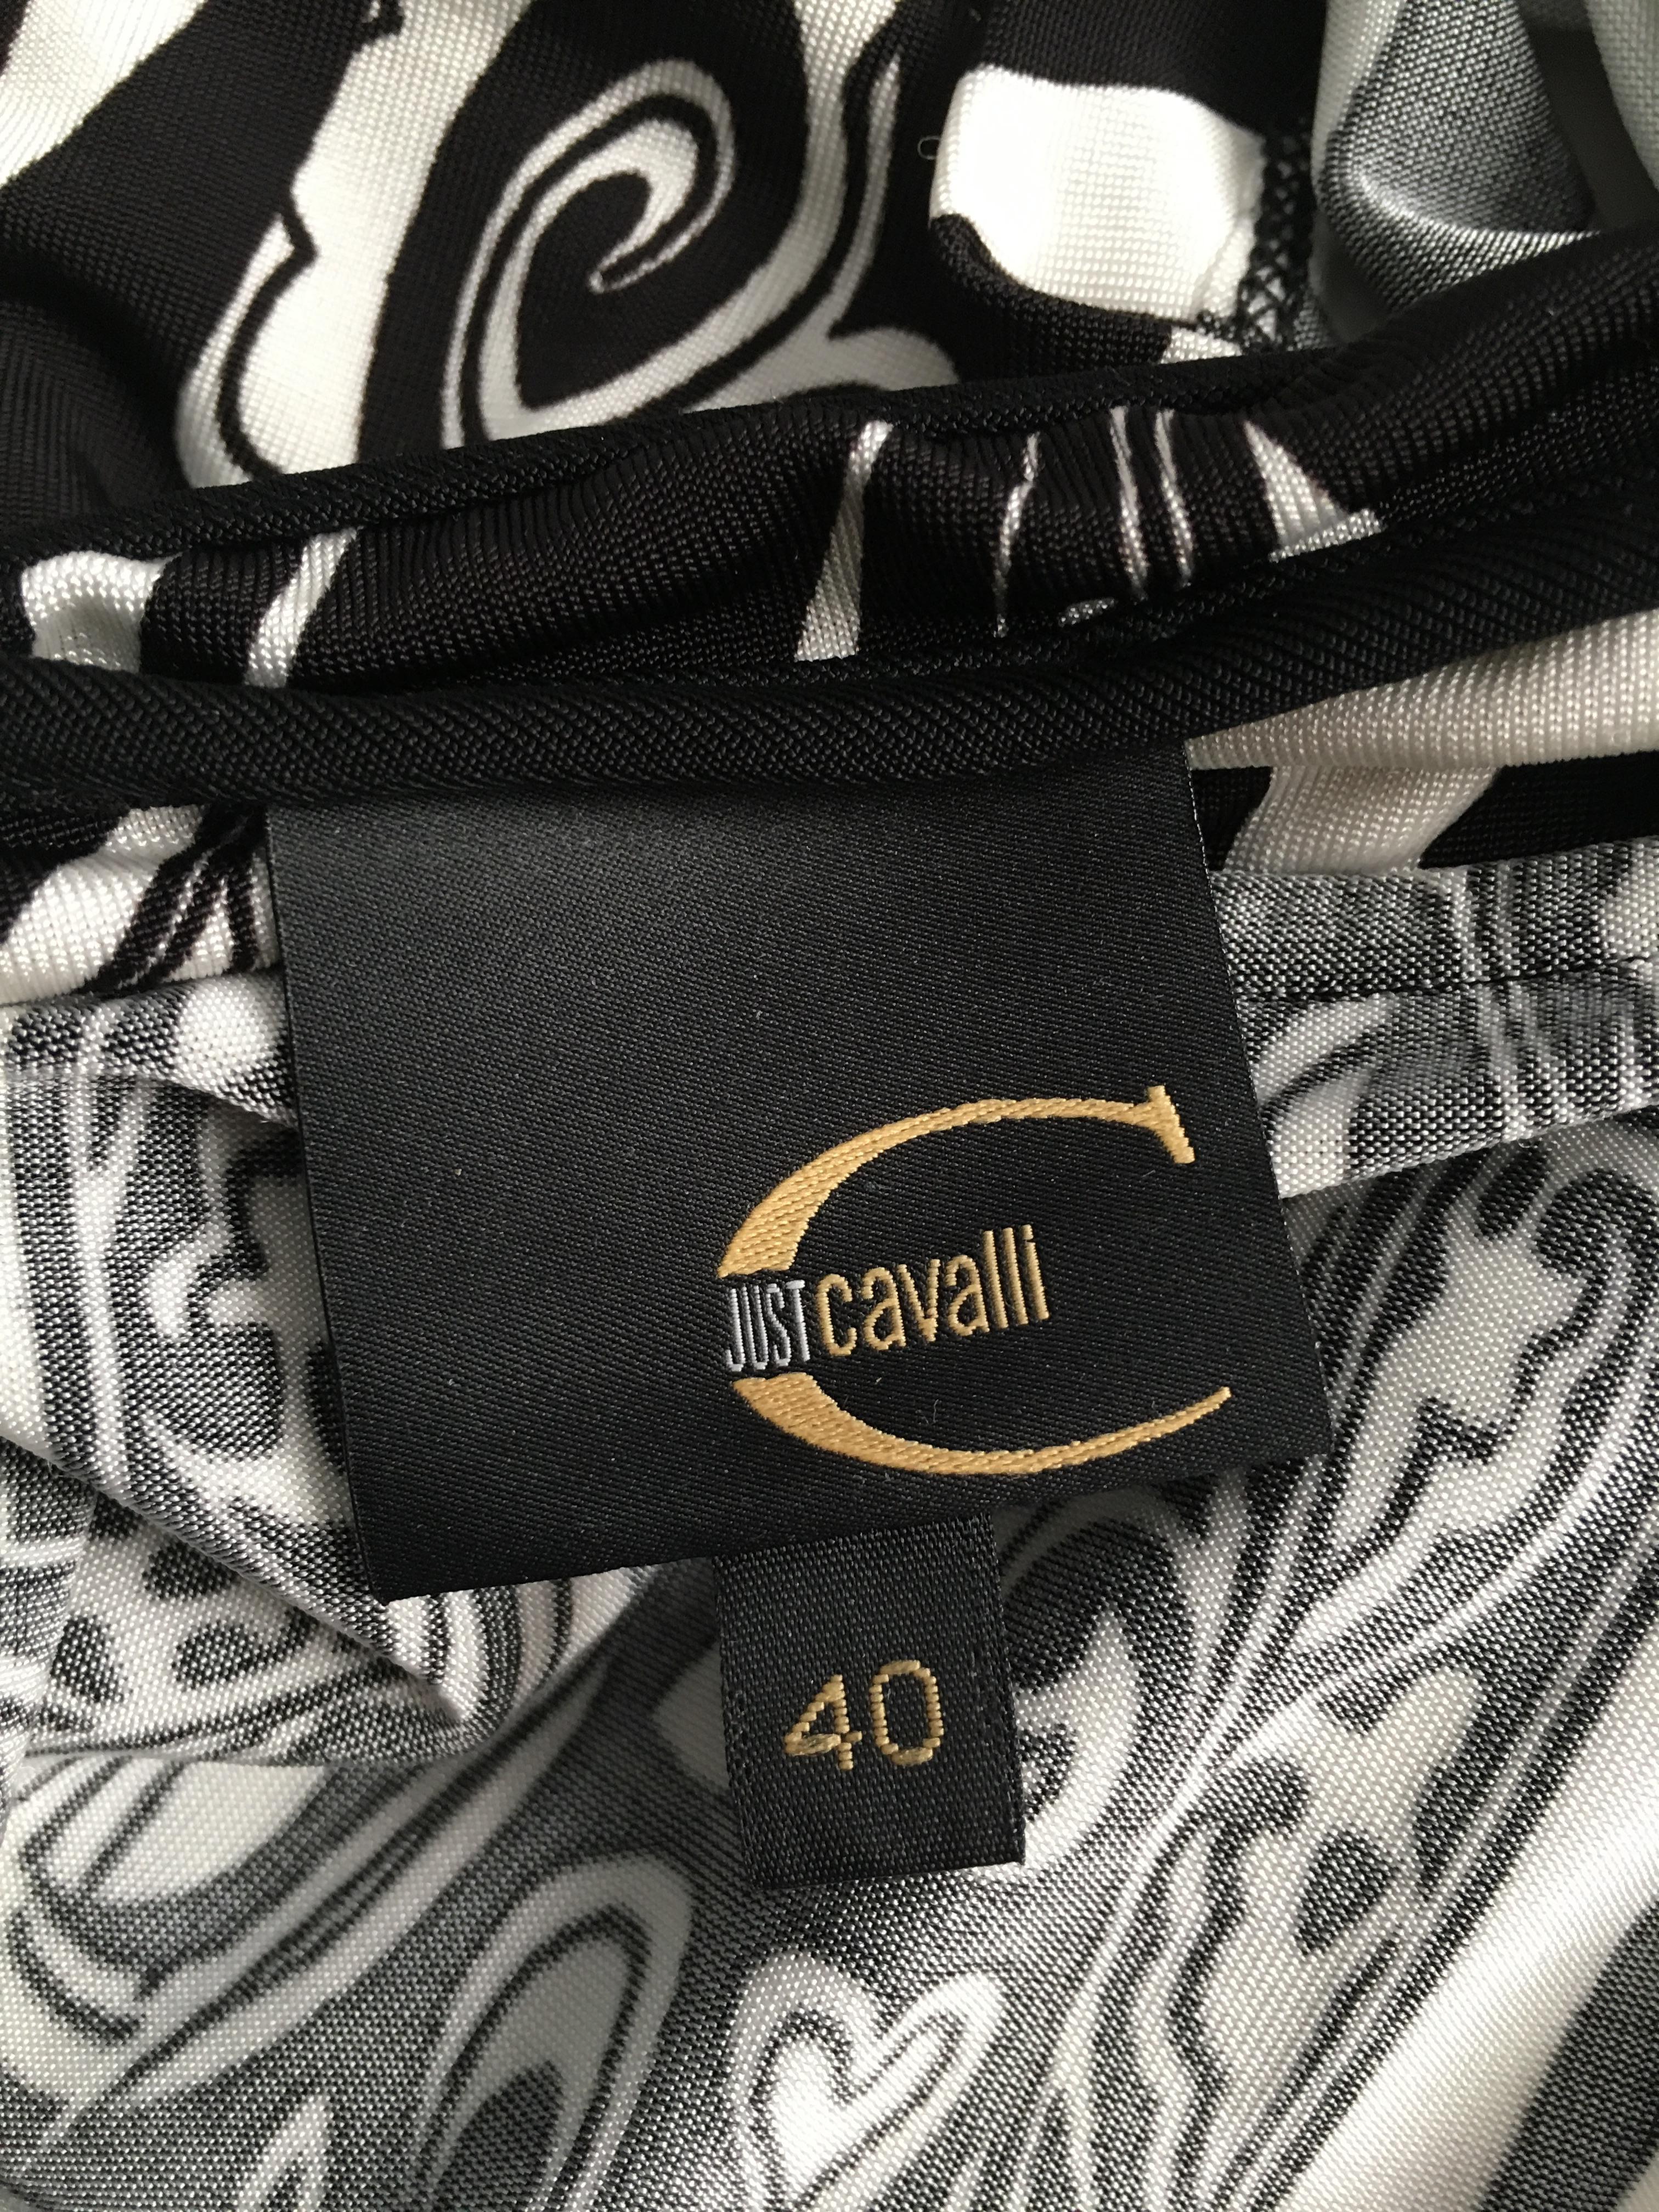 Just Cavalli Black & White Stretch Tank Top Size 4.  For Sale 5